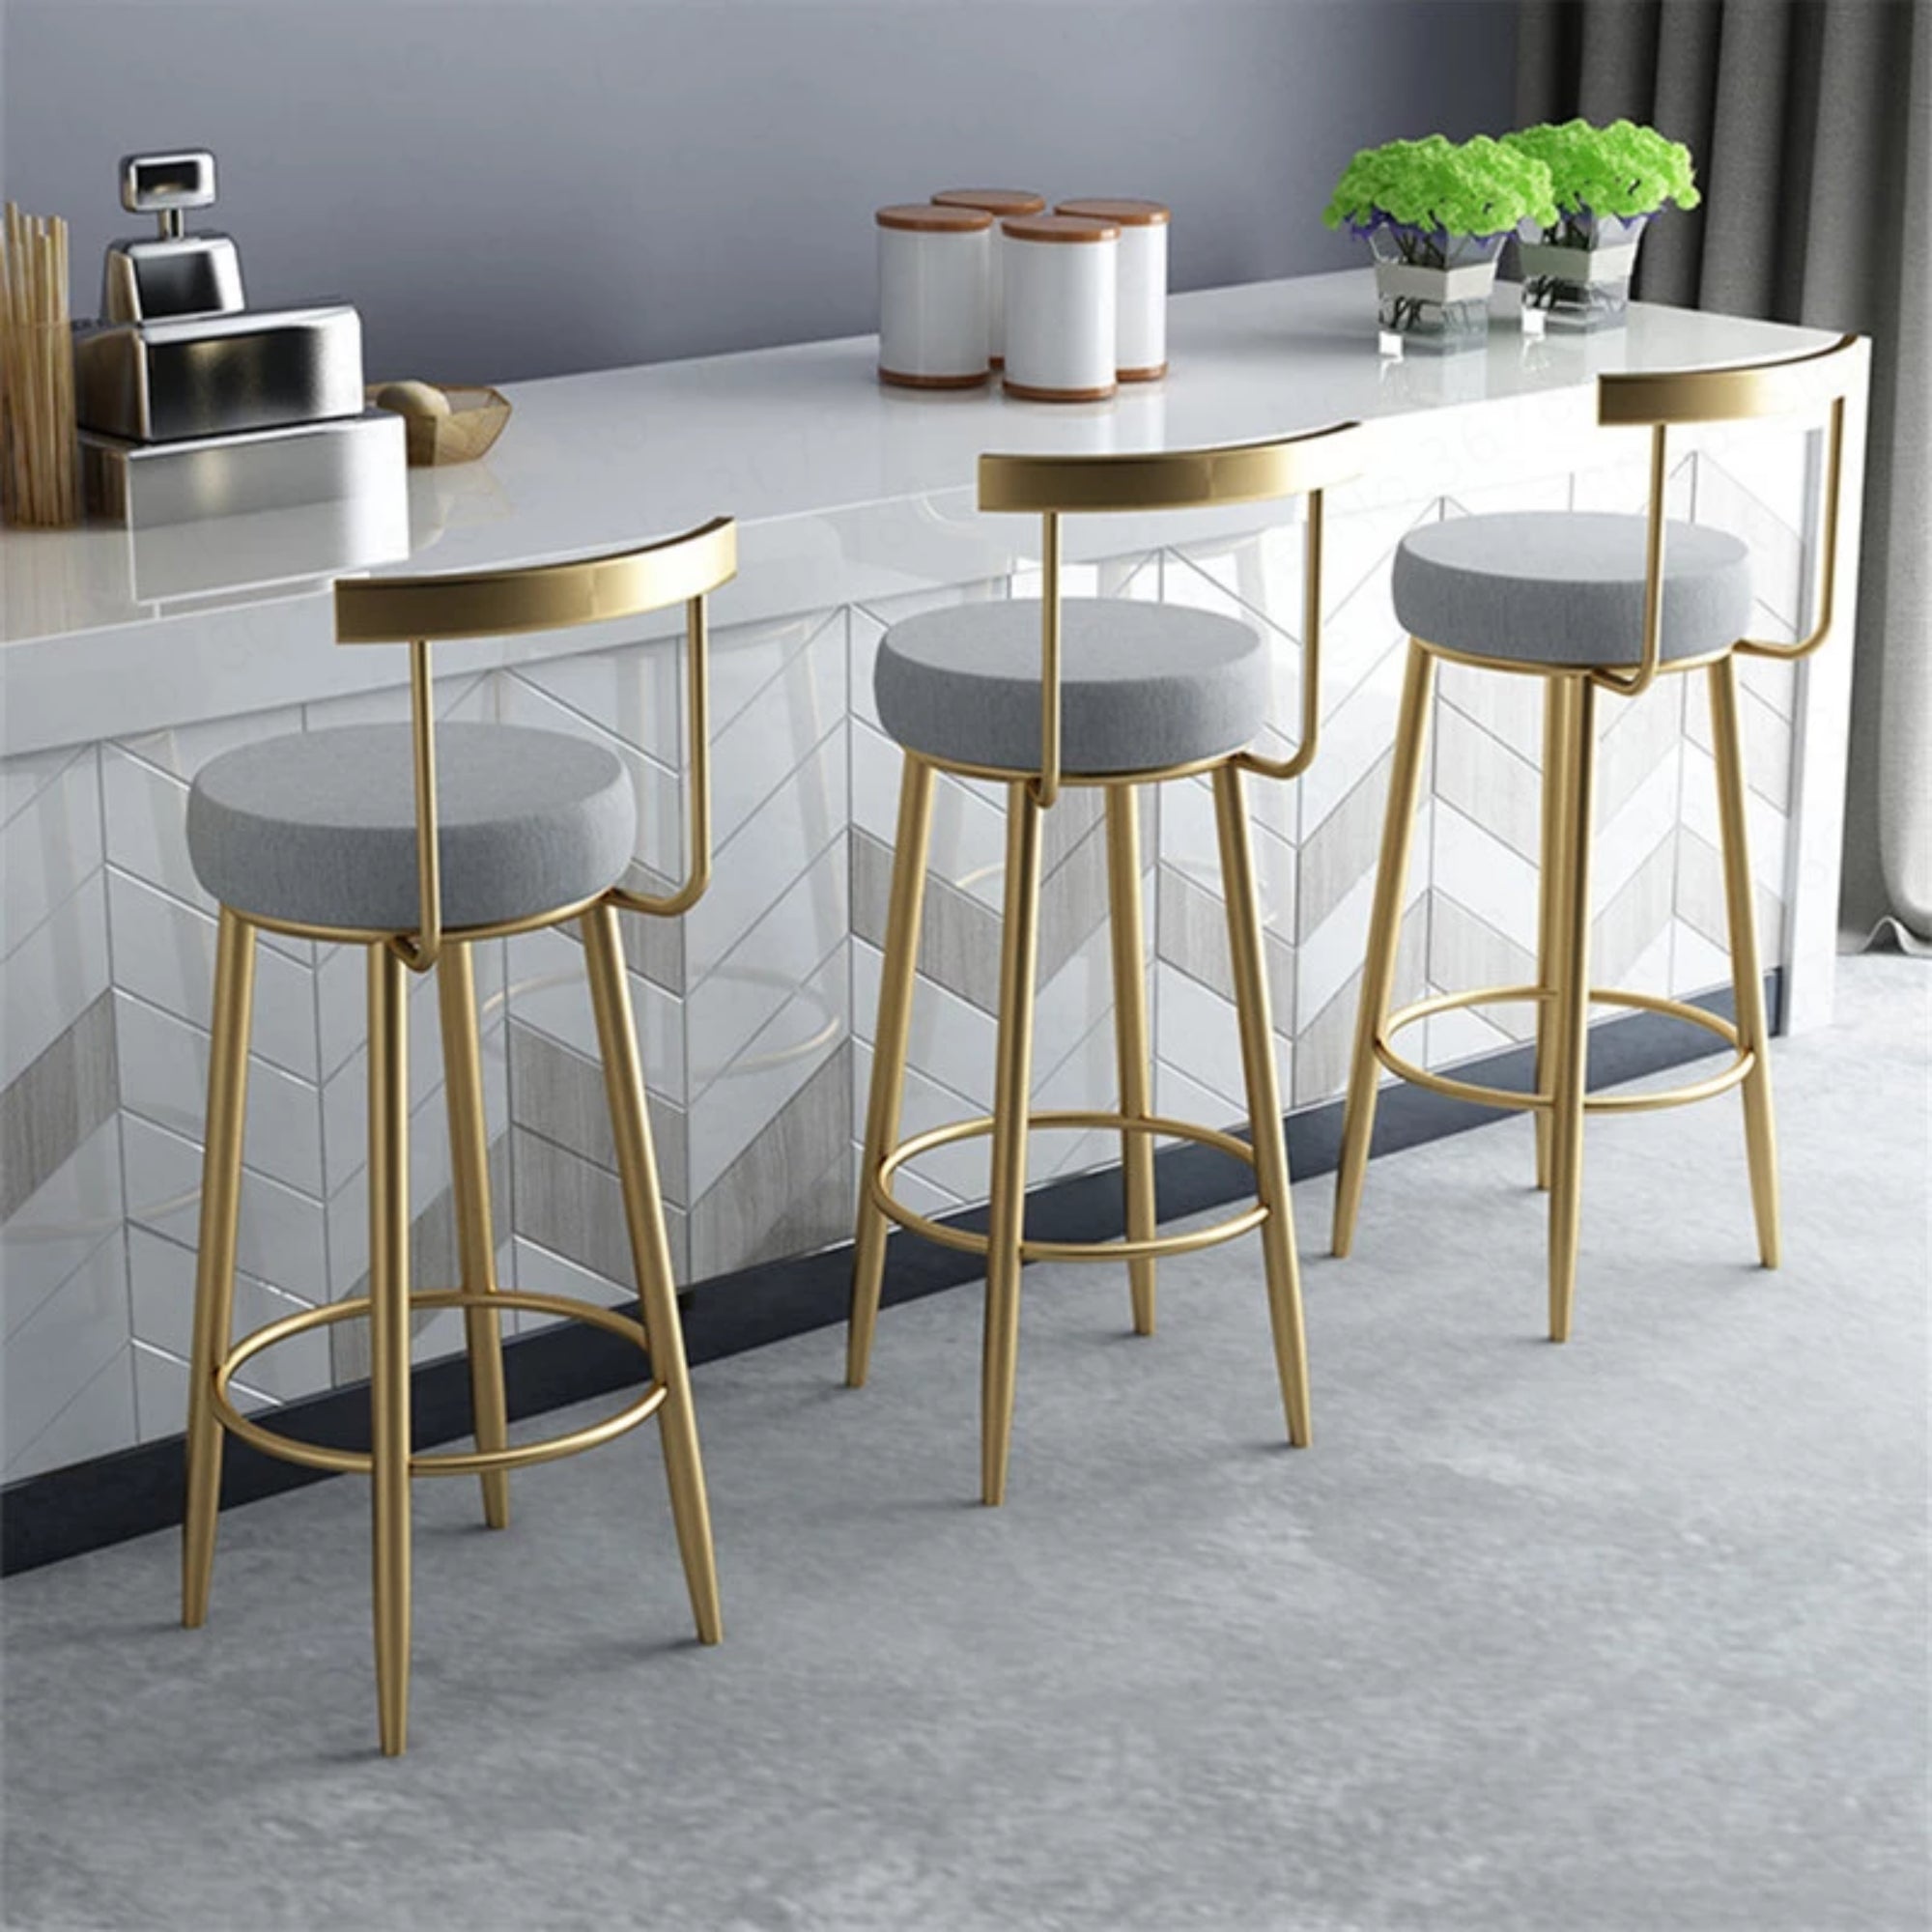 Attractive Bar Stool For Home Furniture With Golden, Black & White Foot